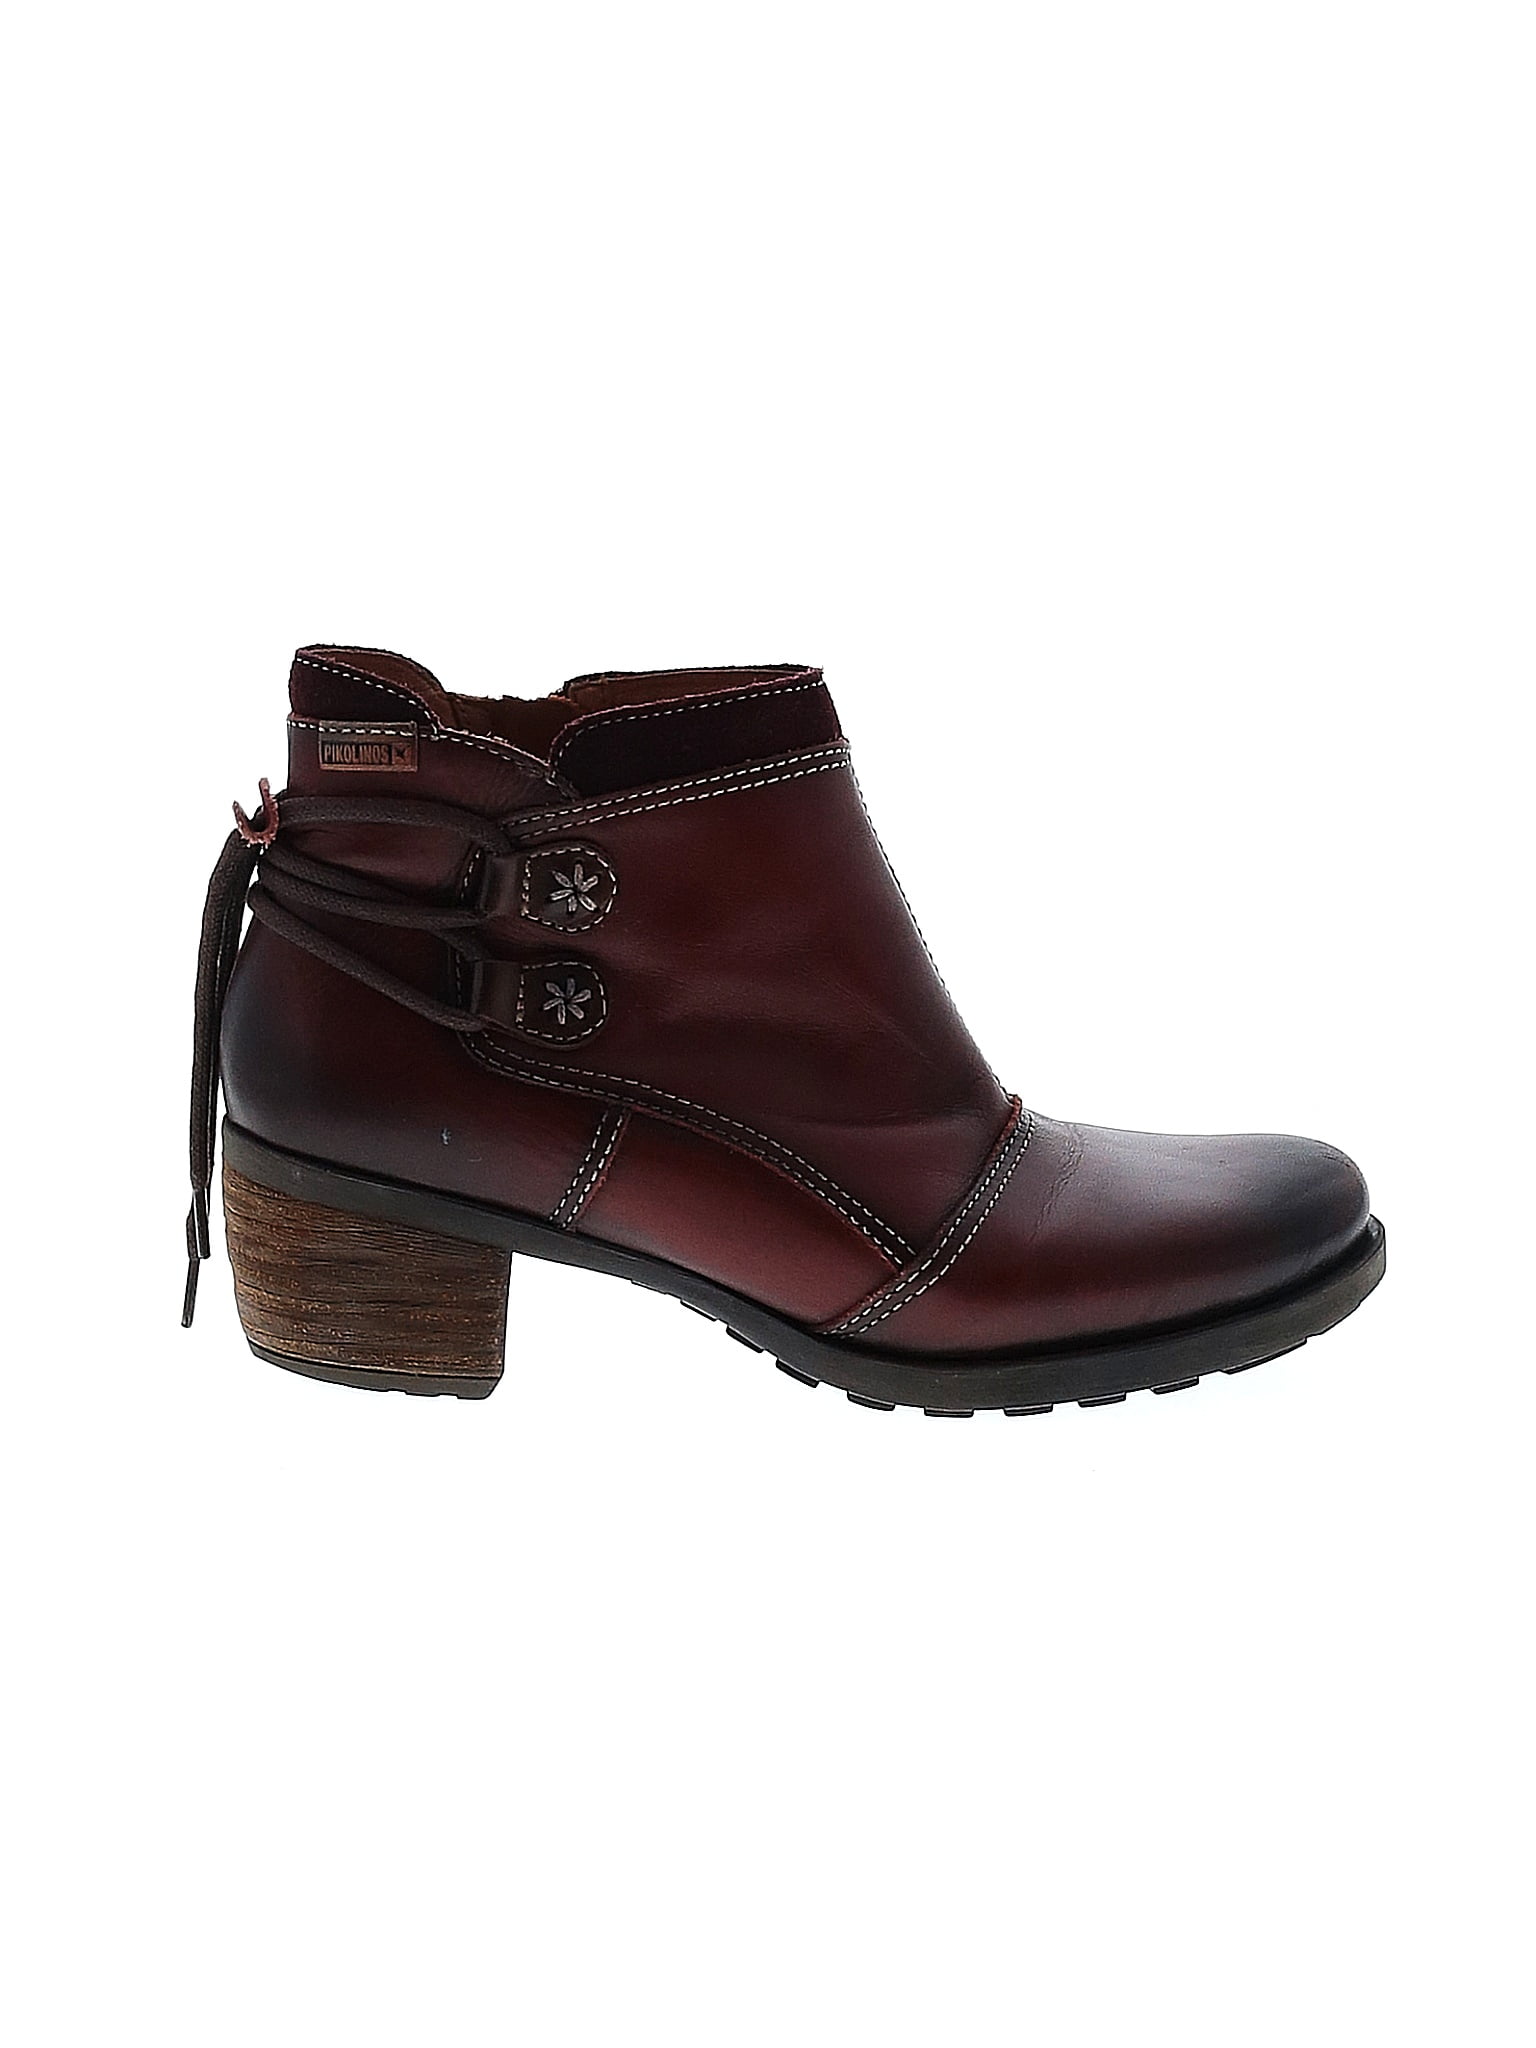 Pikolinos Solid Brown Burgundy Ankle Boots Size 38 (EU) - 65% off | ThredUp